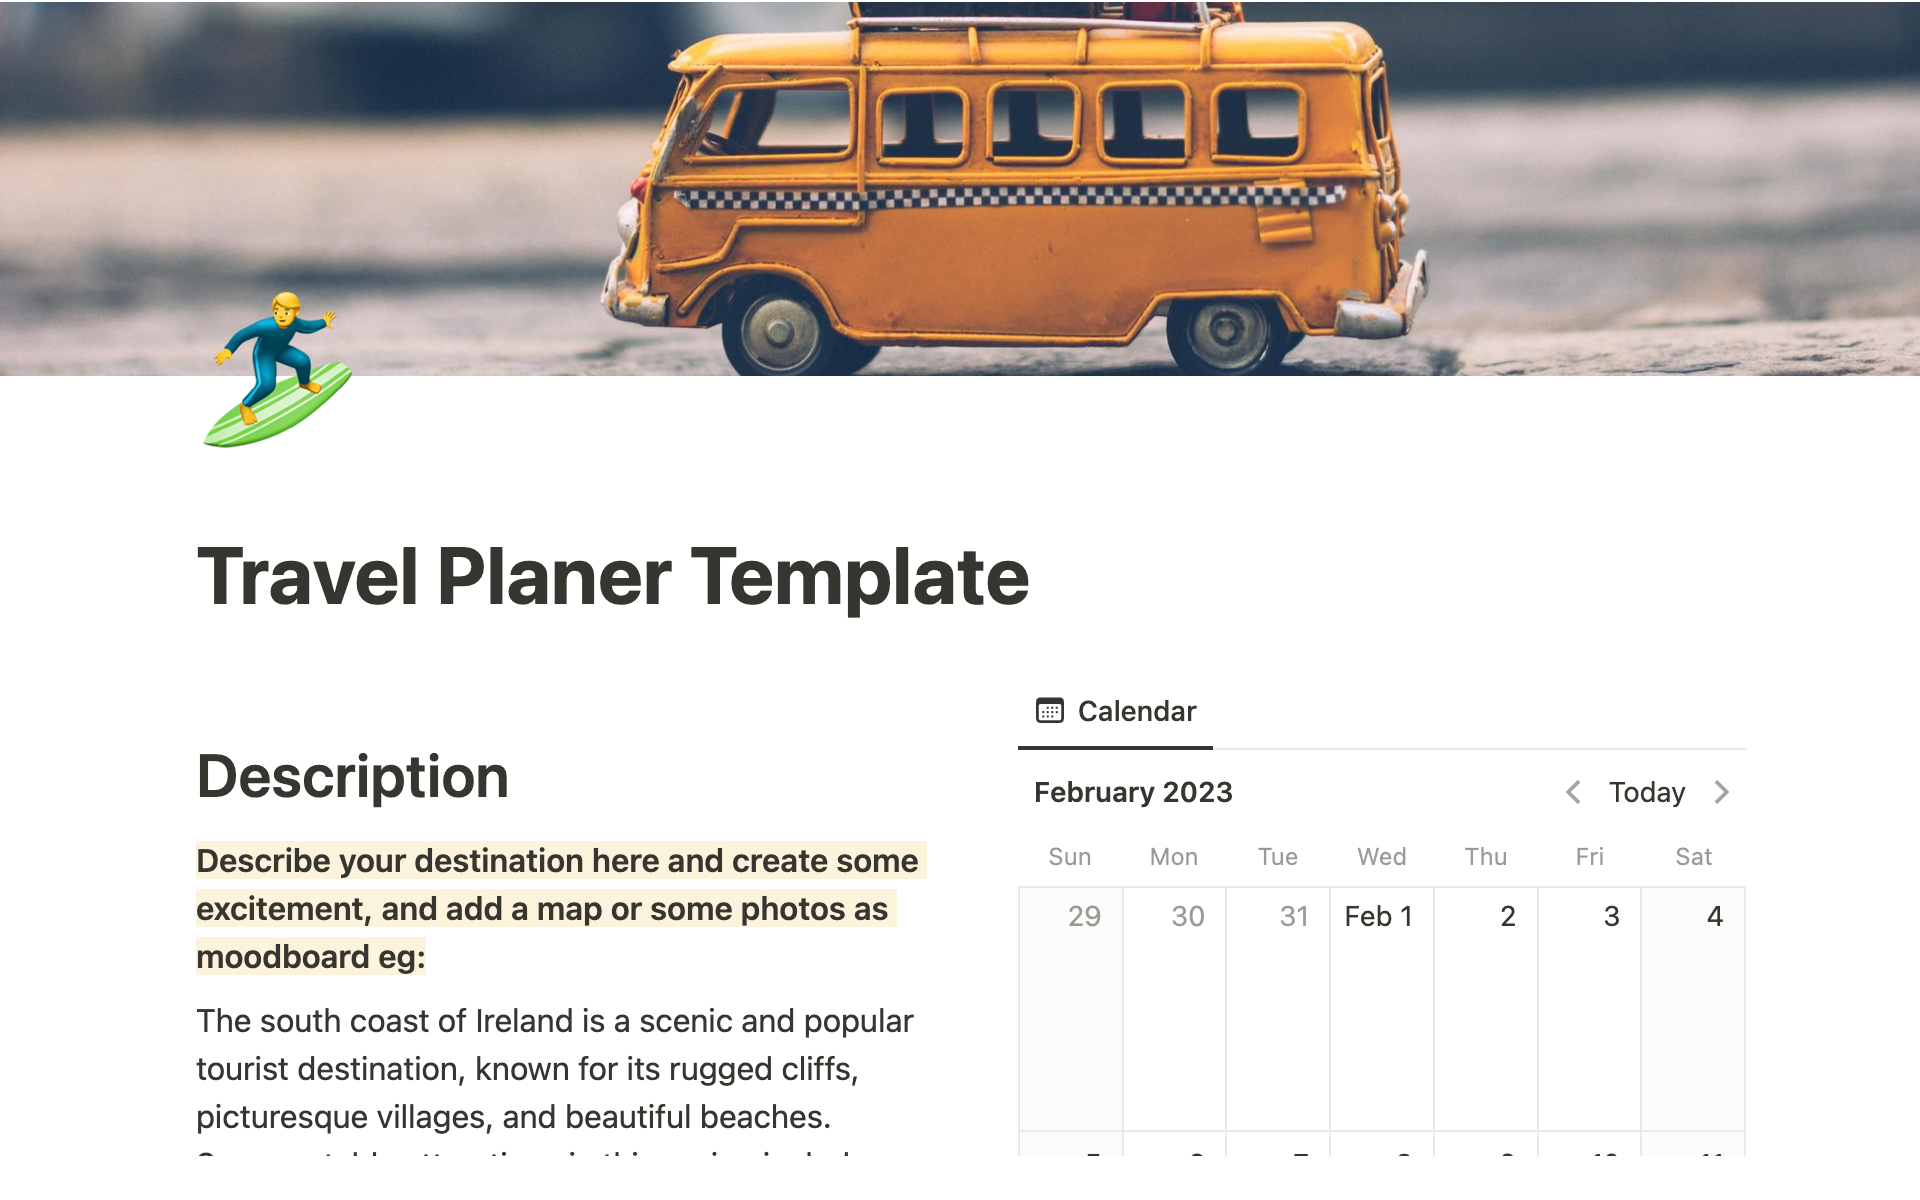 A template preview for Travel Planer Template